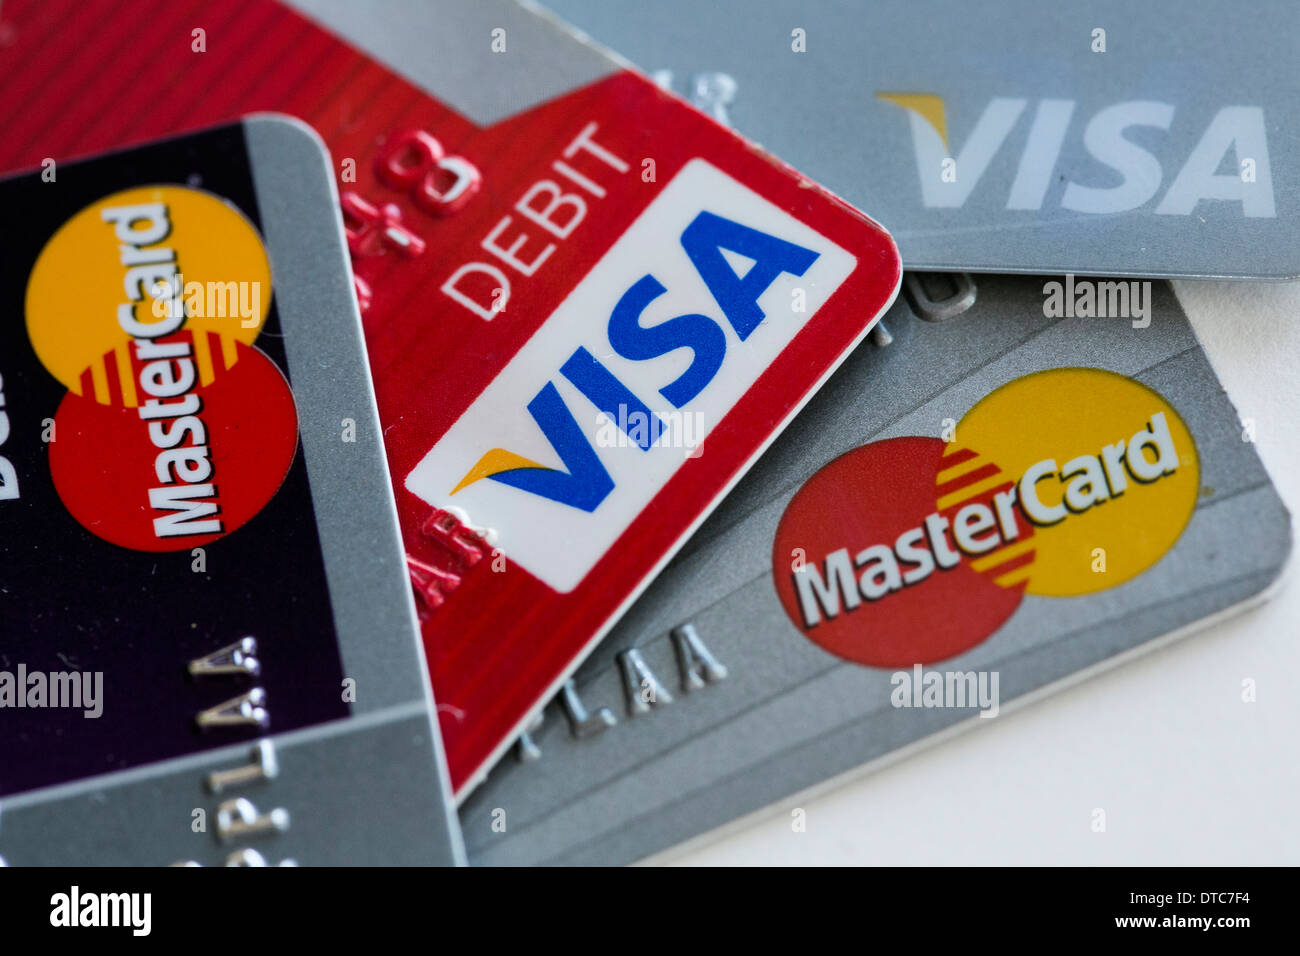 Arranged photos of various U.S. credit cards from Visa, MasterCard and American Express Stock Photo